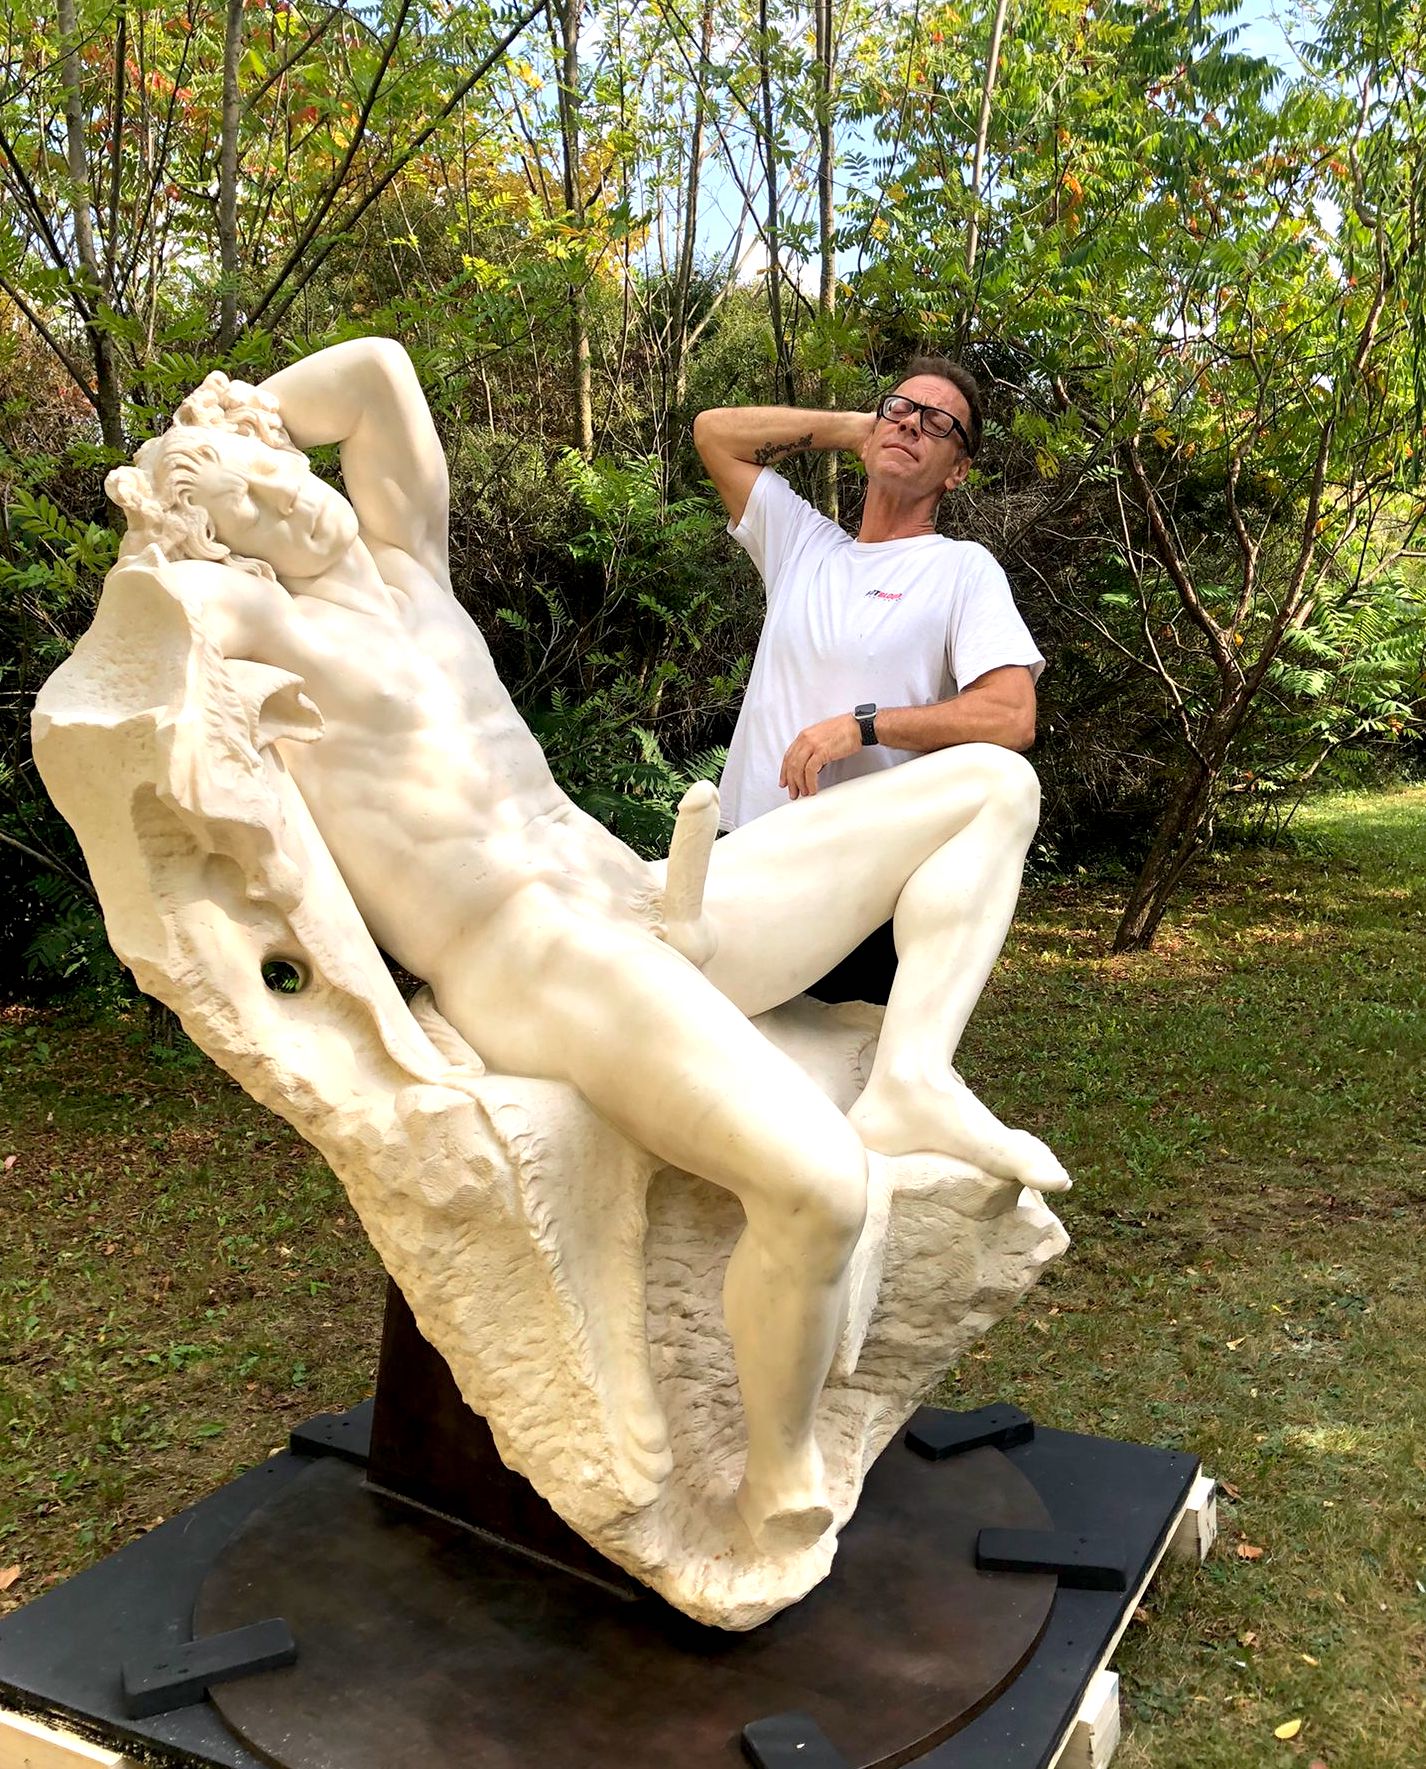 Sculpture Porn - A Look at the Rocco Siffredi Sculpture, Which Will 'Star' in his Next  Project. - bdsmcafe.com BDSM Stories